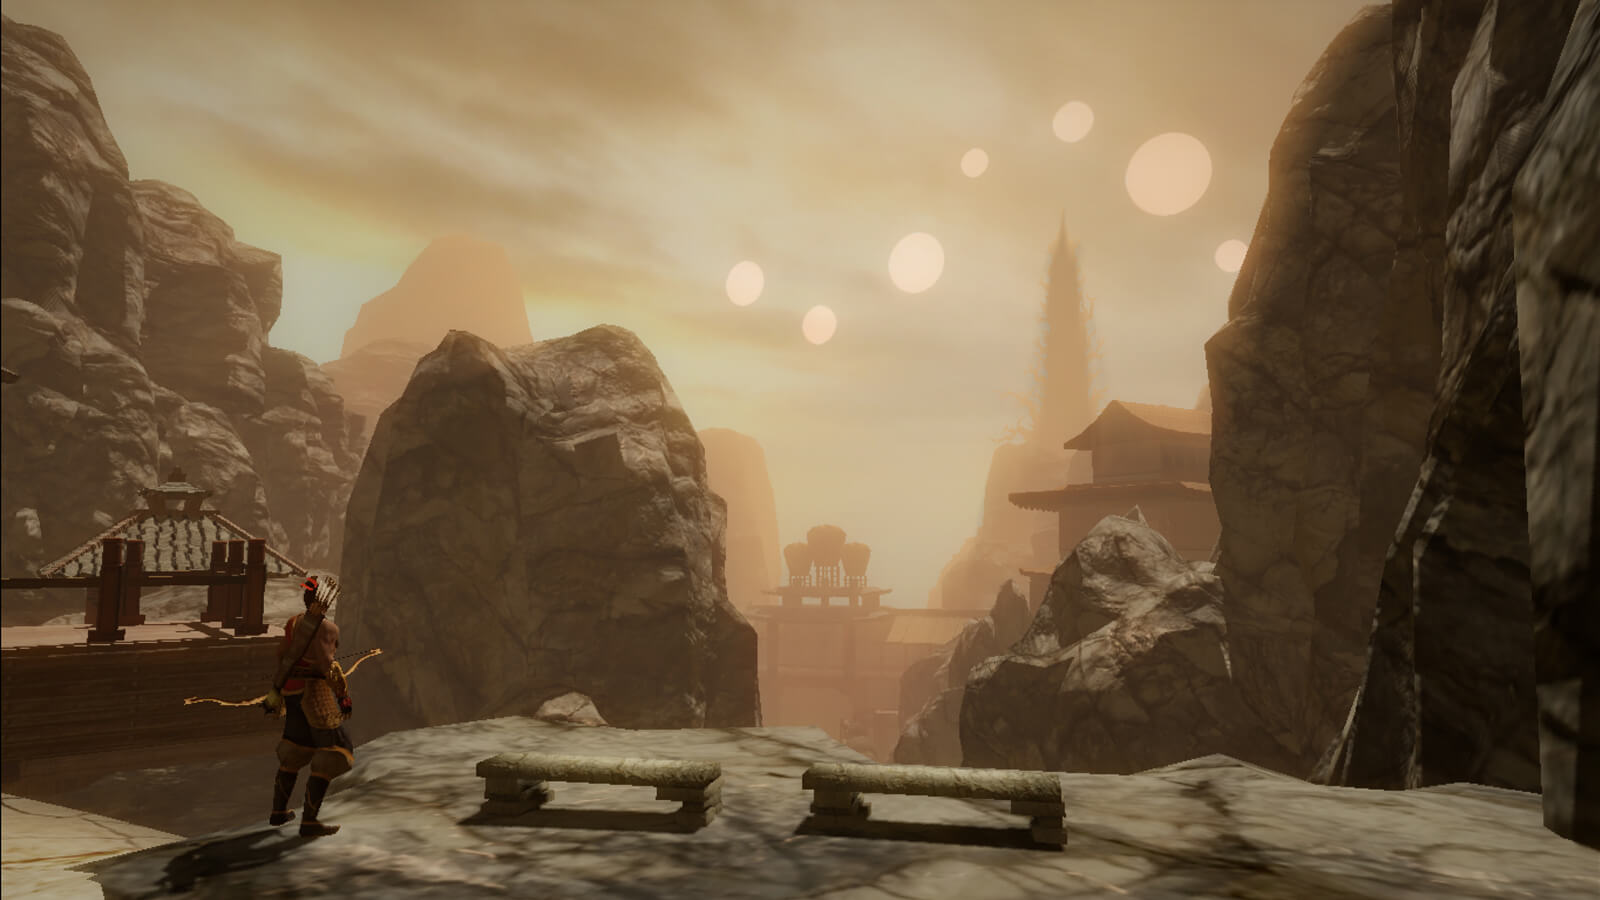 View of the player's character from behind in a mountainous village. Seven suns of varying sizes hang in a hazy sky.